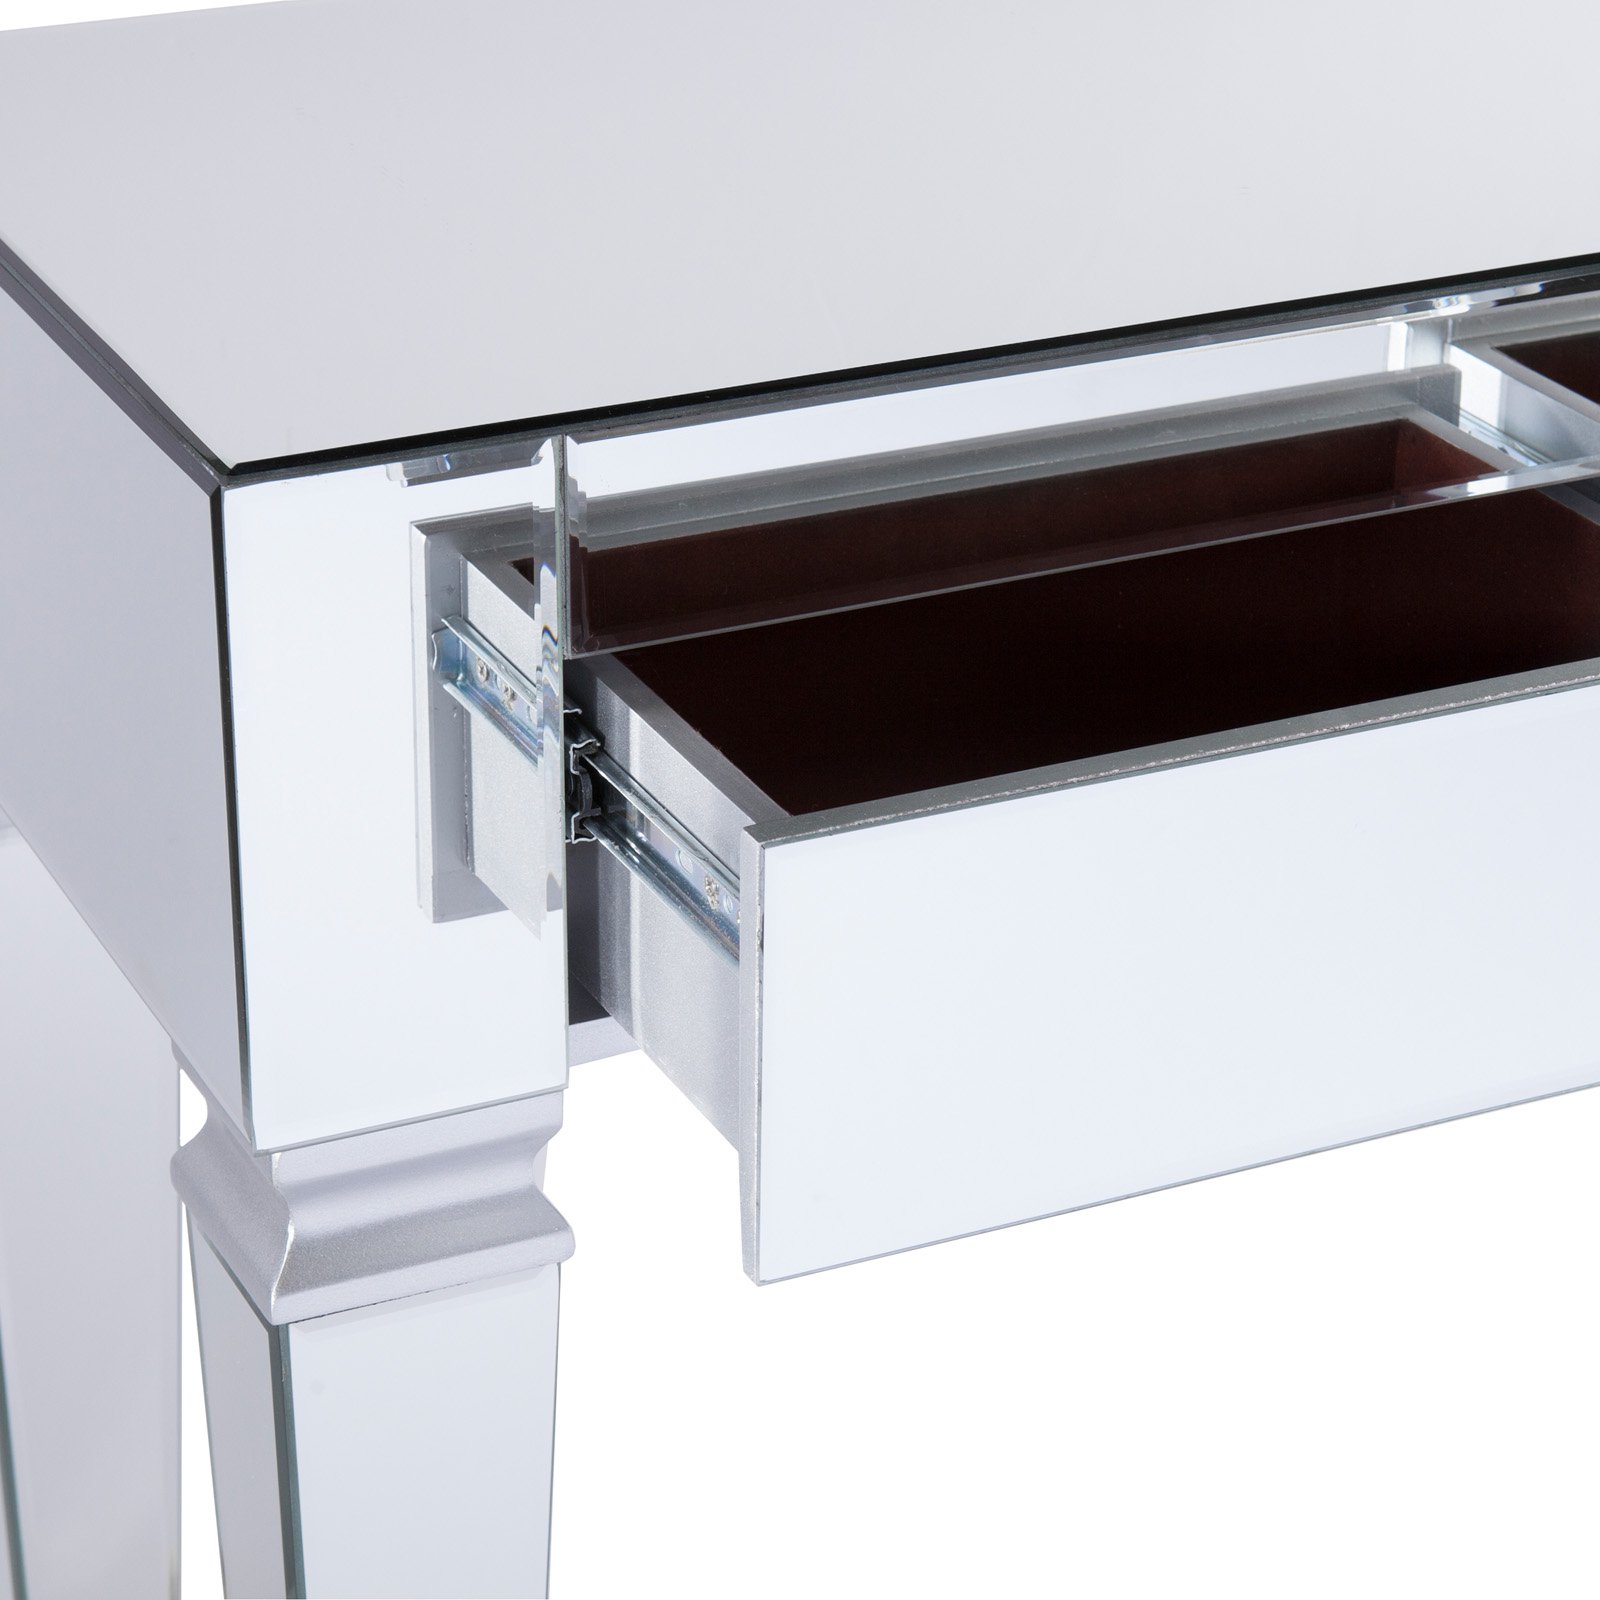 46" Clear and Silver Contemporary Beveled Mirror Rectangular Top Console Table - image 5 of 10